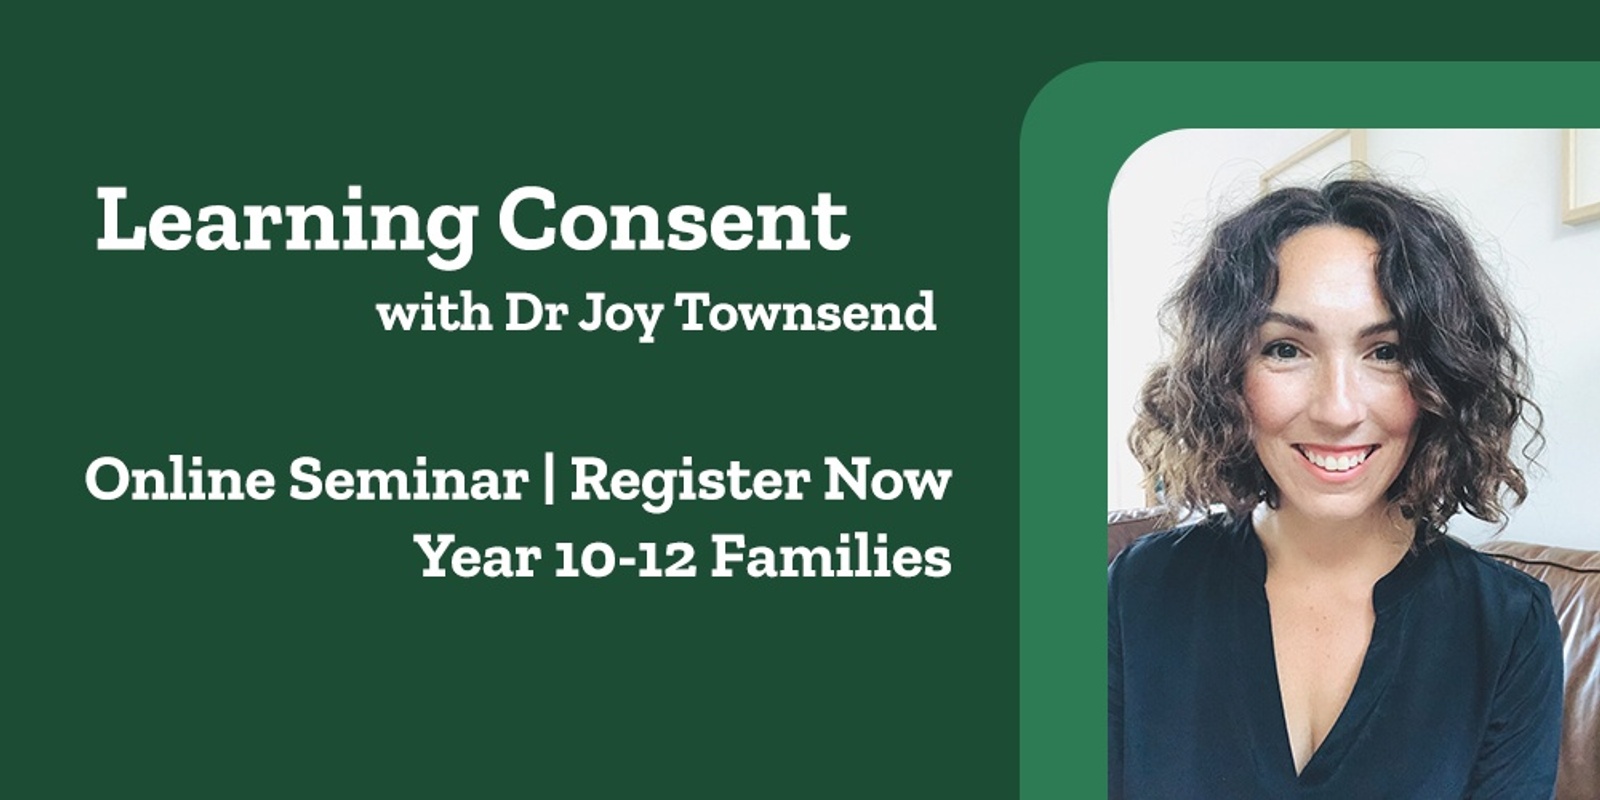 Learning Consent | with Dr Joy Townsend